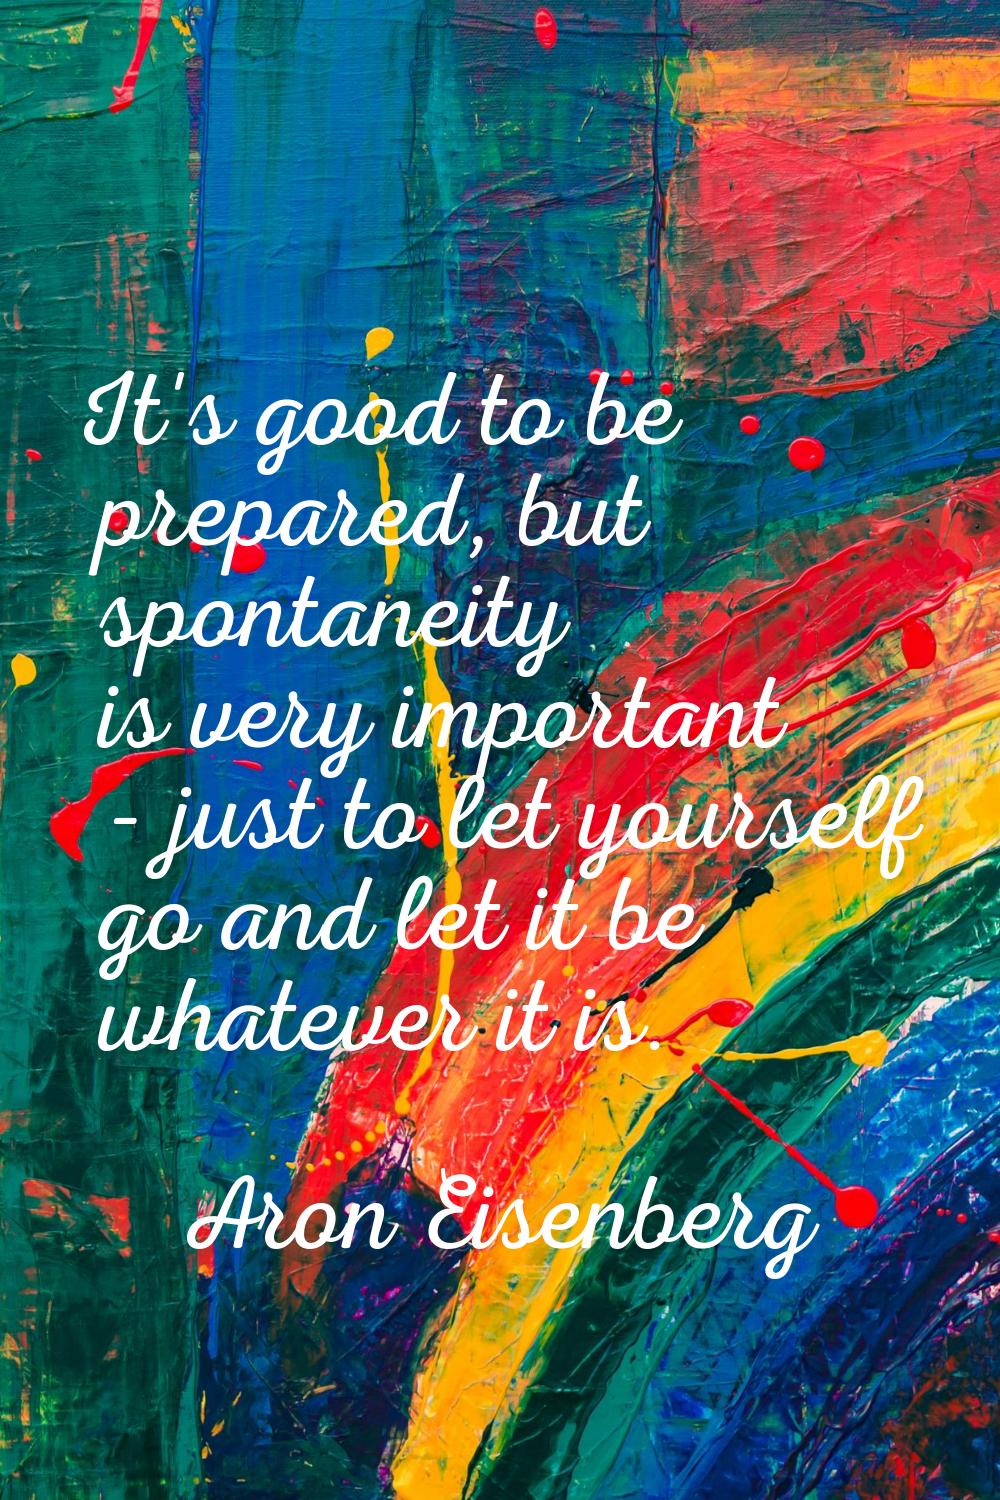 It's good to be prepared, but spontaneity is very important - just to let yourself go and let it be